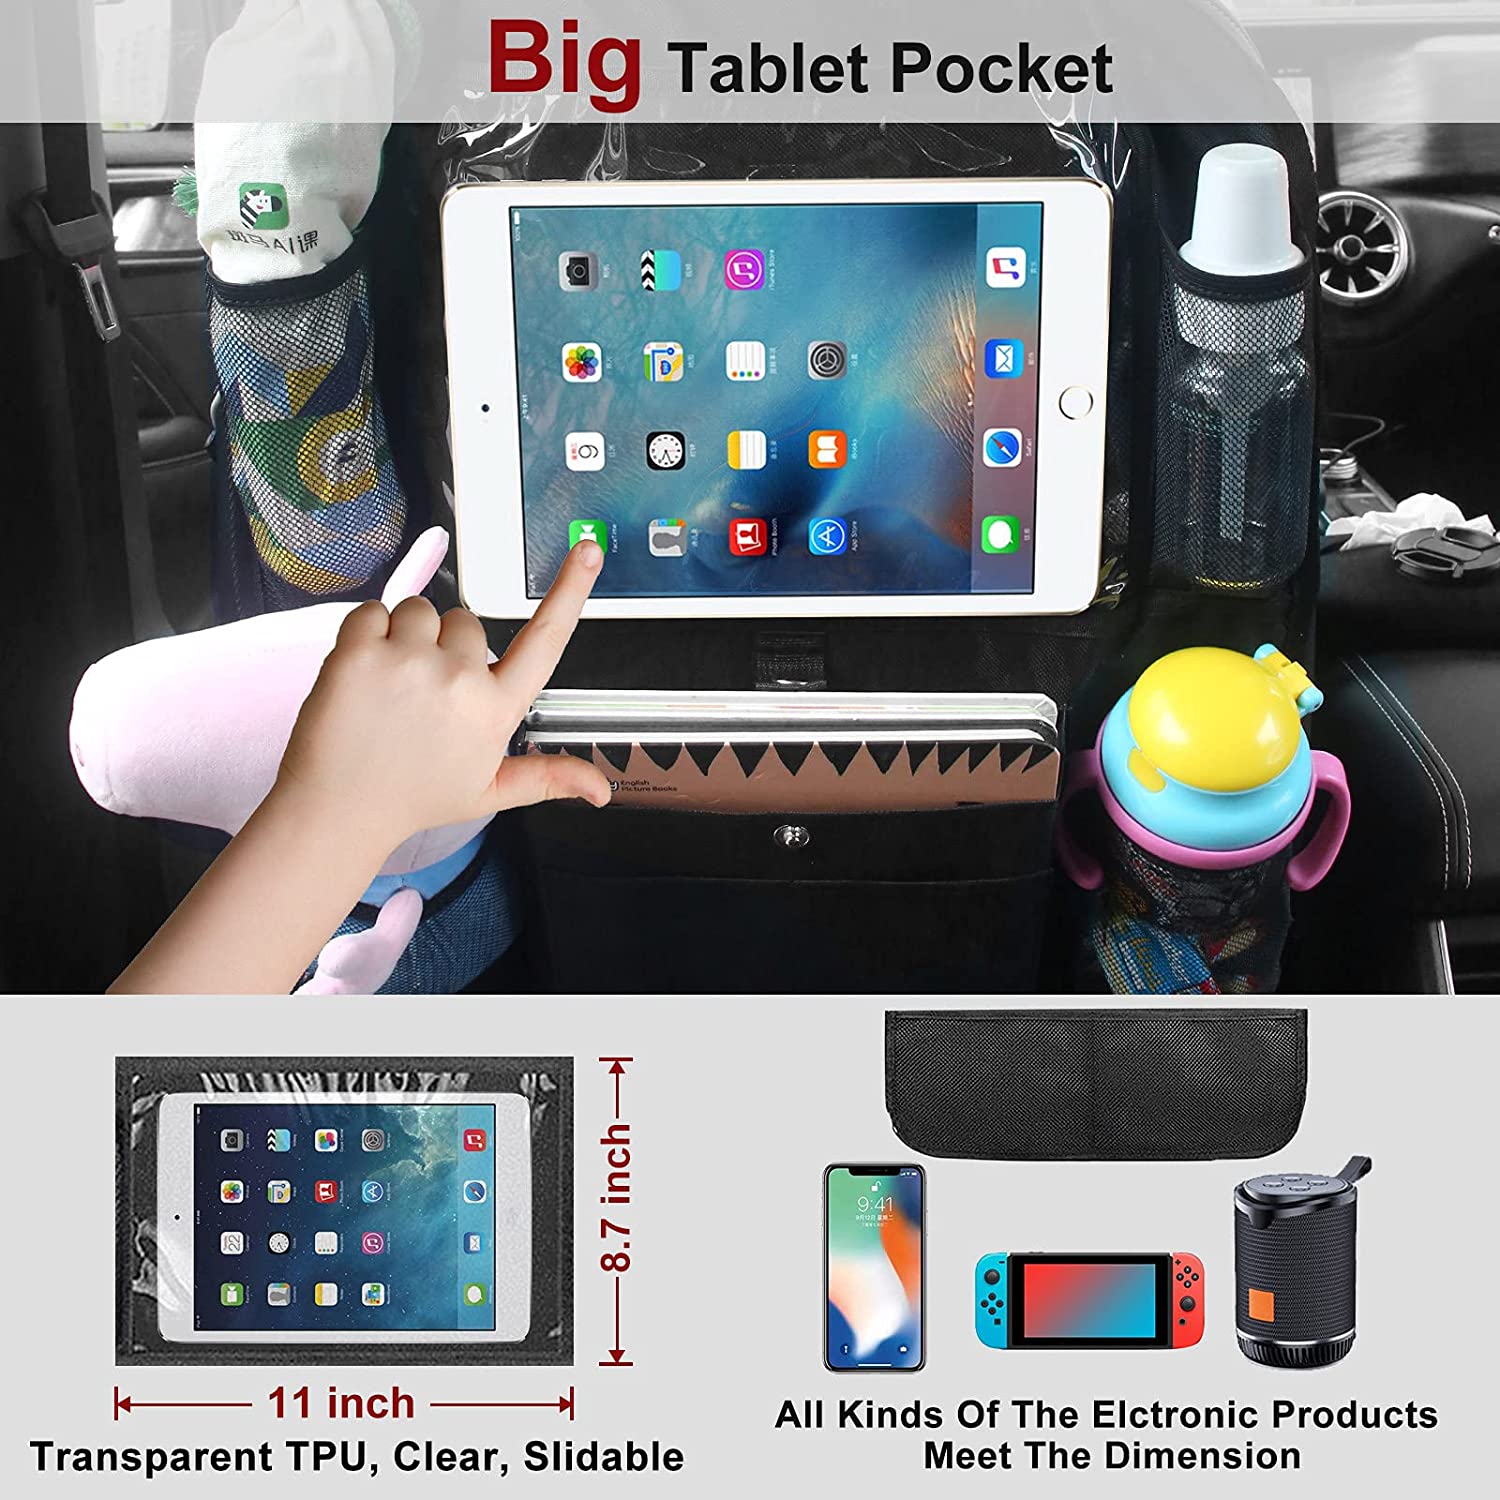 Car Organiser, Car Seat Organiser for Kids with Tablet Pocket, Large Size(25.6"X17.7") , 10 Pockets Waterproof Car Tidy Organiser, Great Travelling Accessory for Drivers with Kids - FoxMart™️ - Ariesnova